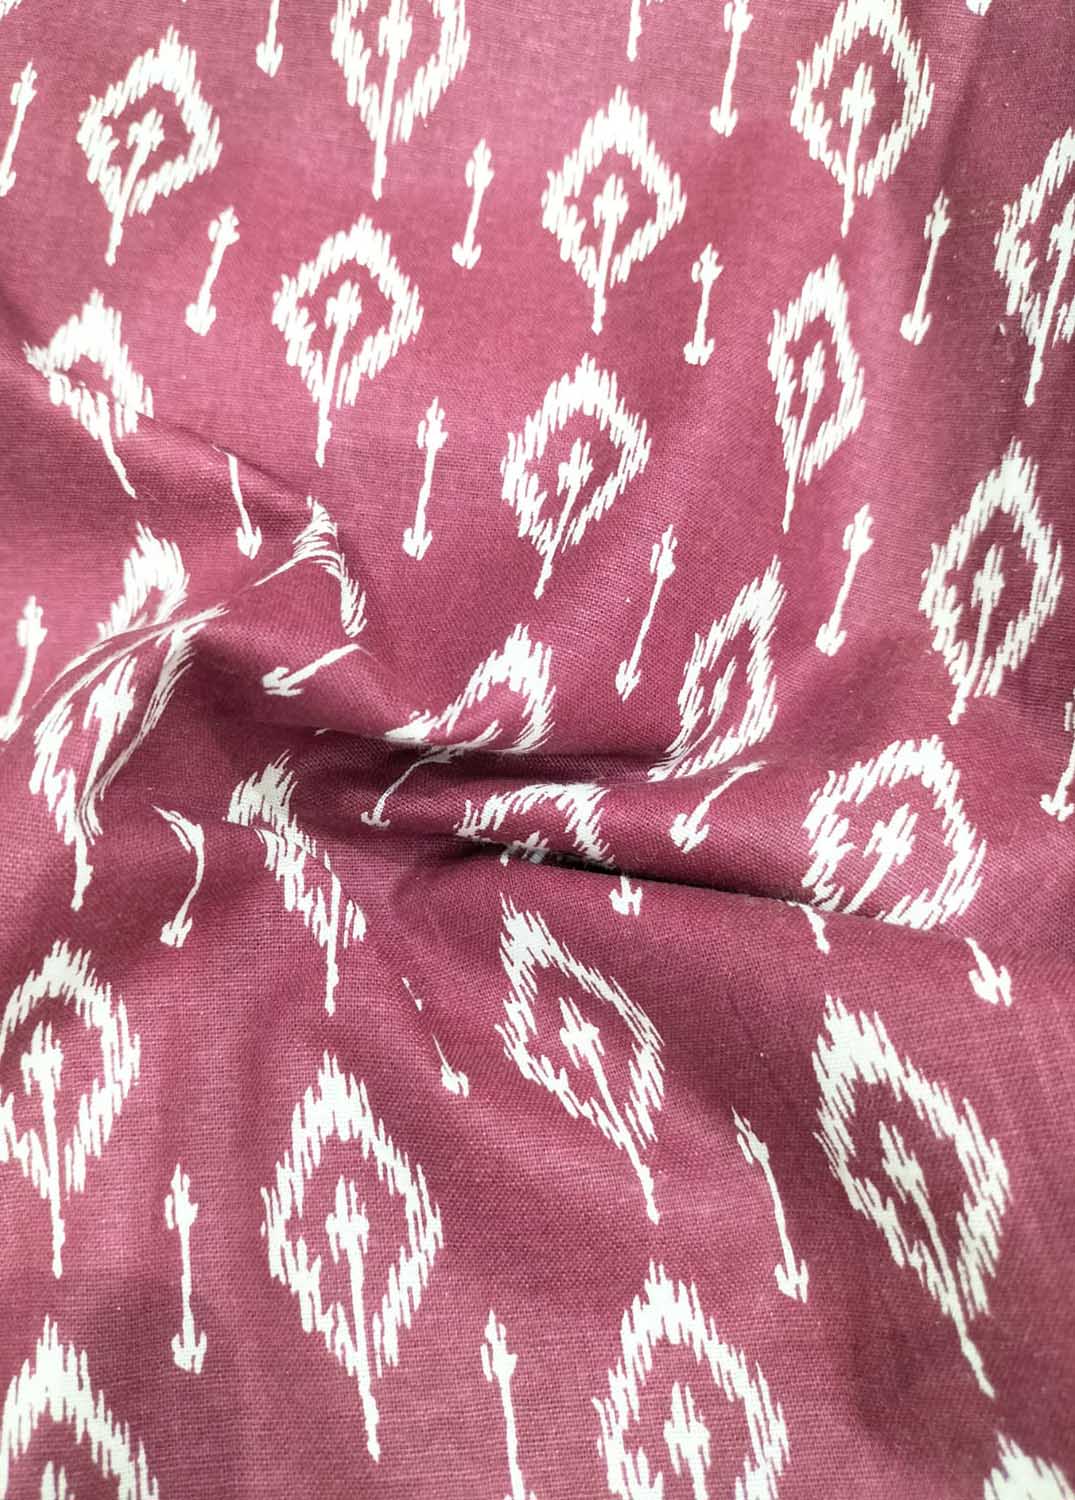 Pink Cotton Fabric with Digital Print - 1 Mtr Length